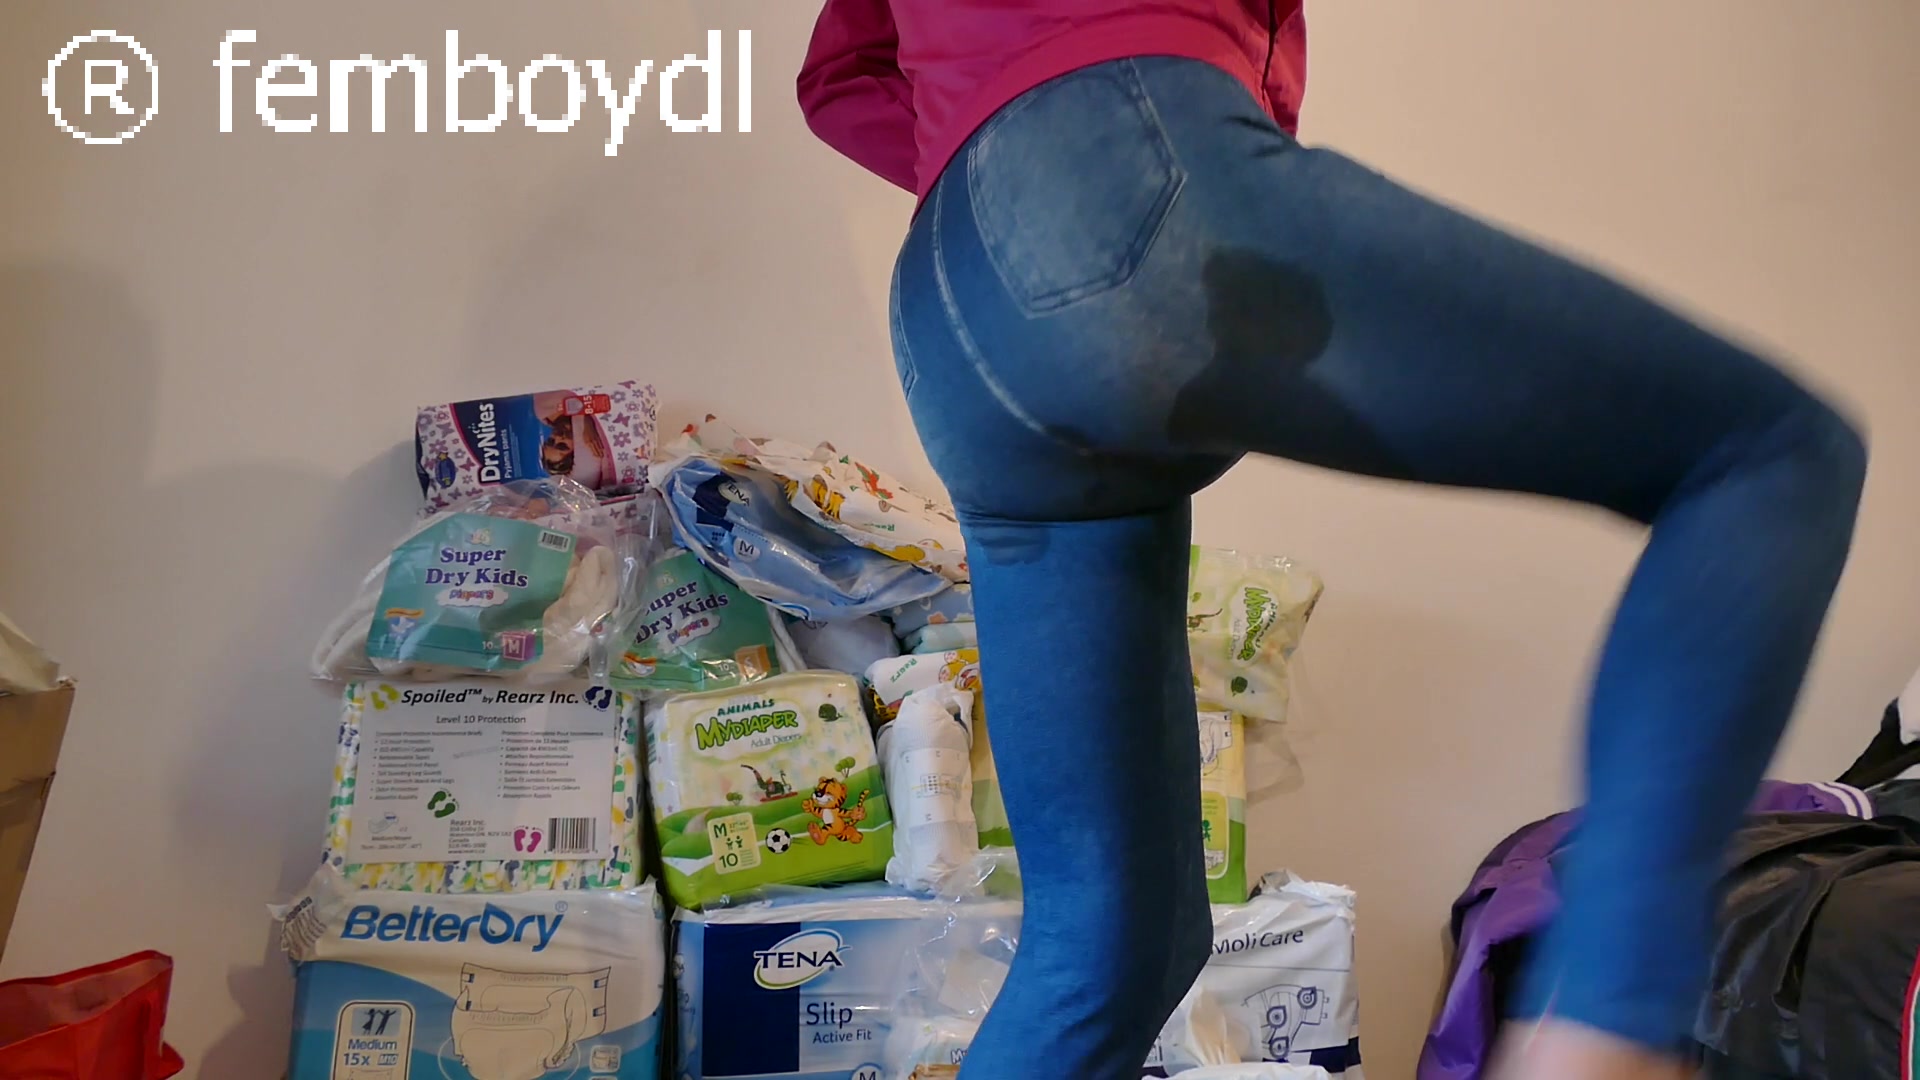 wetting diaper - wearing sexy spandex jeans jeggings